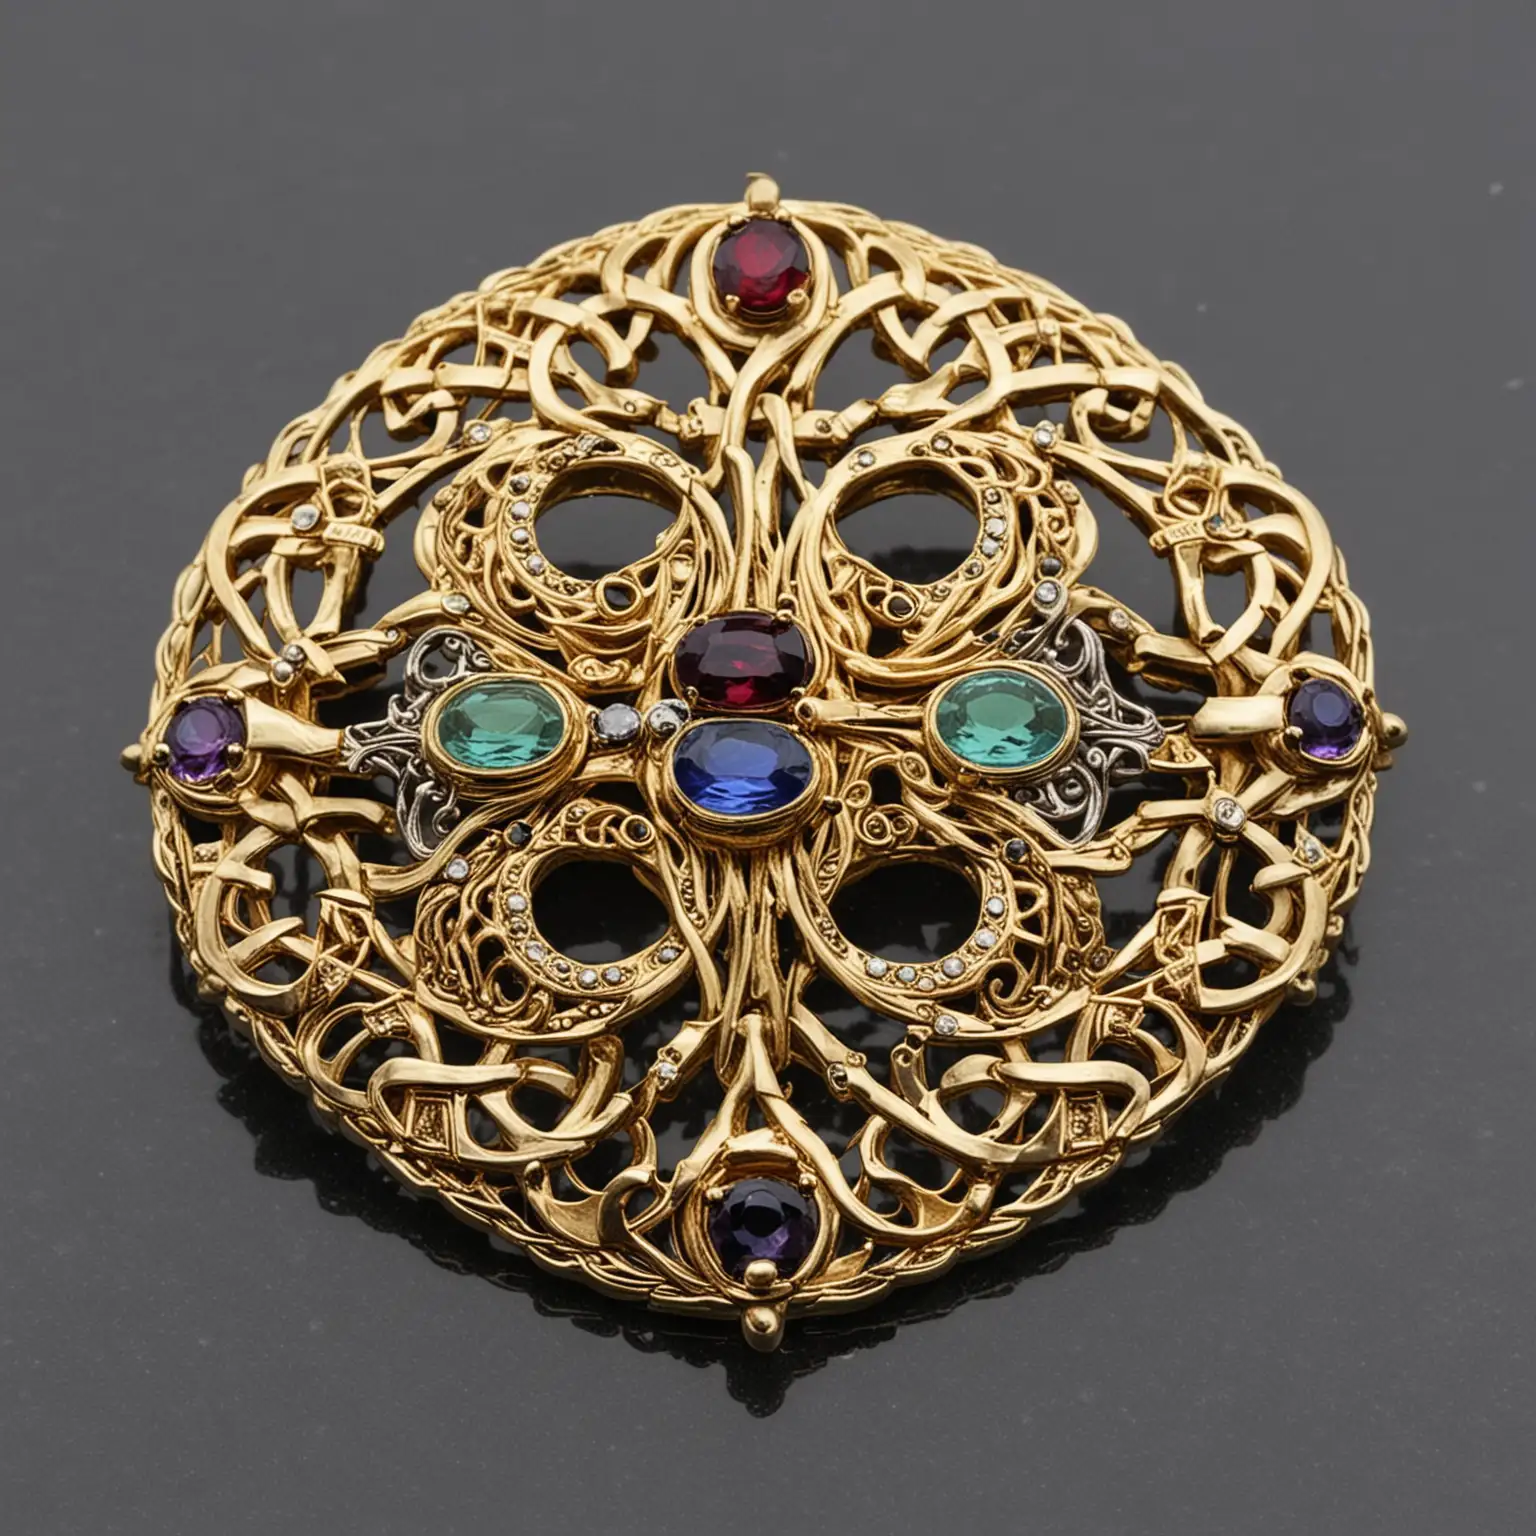 Ornate-Celtic-Brooch-in-Gold-with-Multicolored-Stones